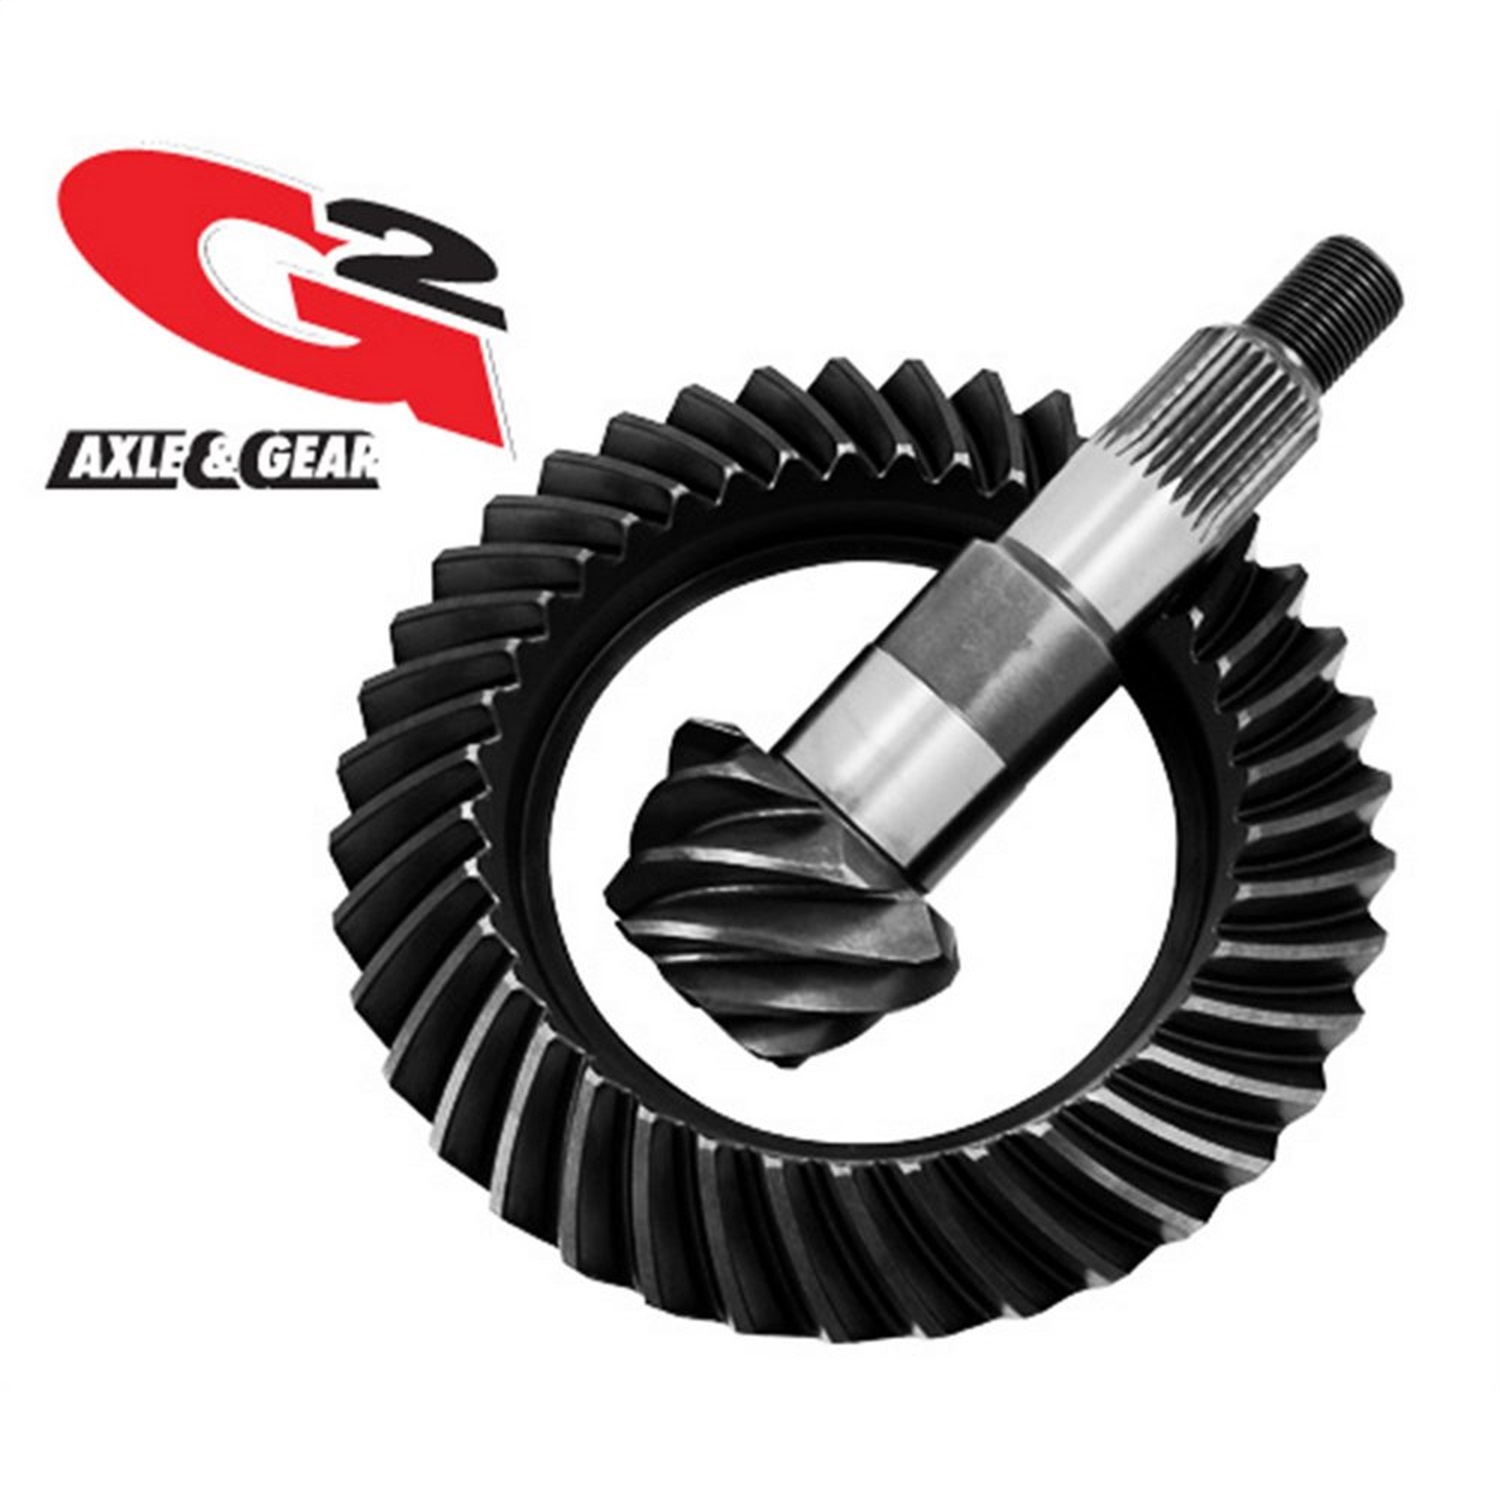 G2 Axle and Gear G2 Axle and Gear 2-2041-529 Ring and Pinion